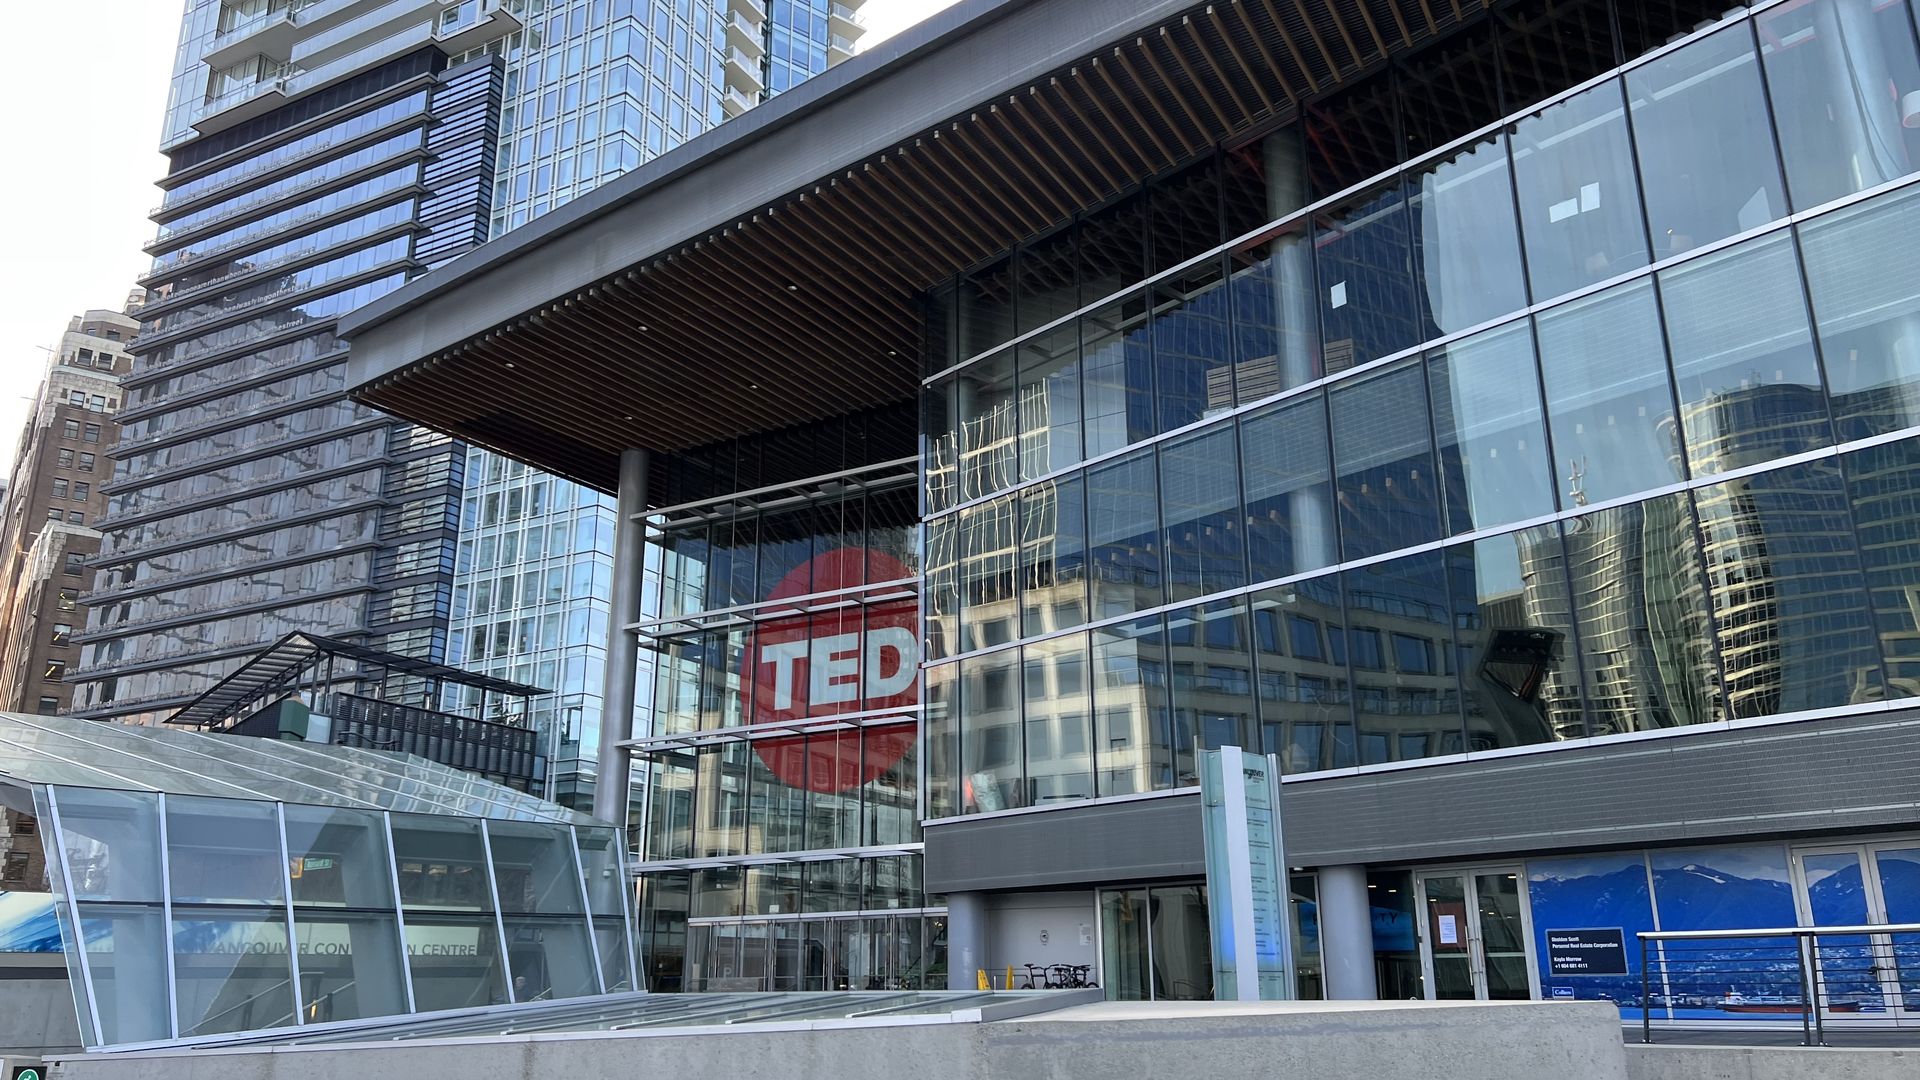 An exterior of the Ted logo at the Vancouver Convention Center